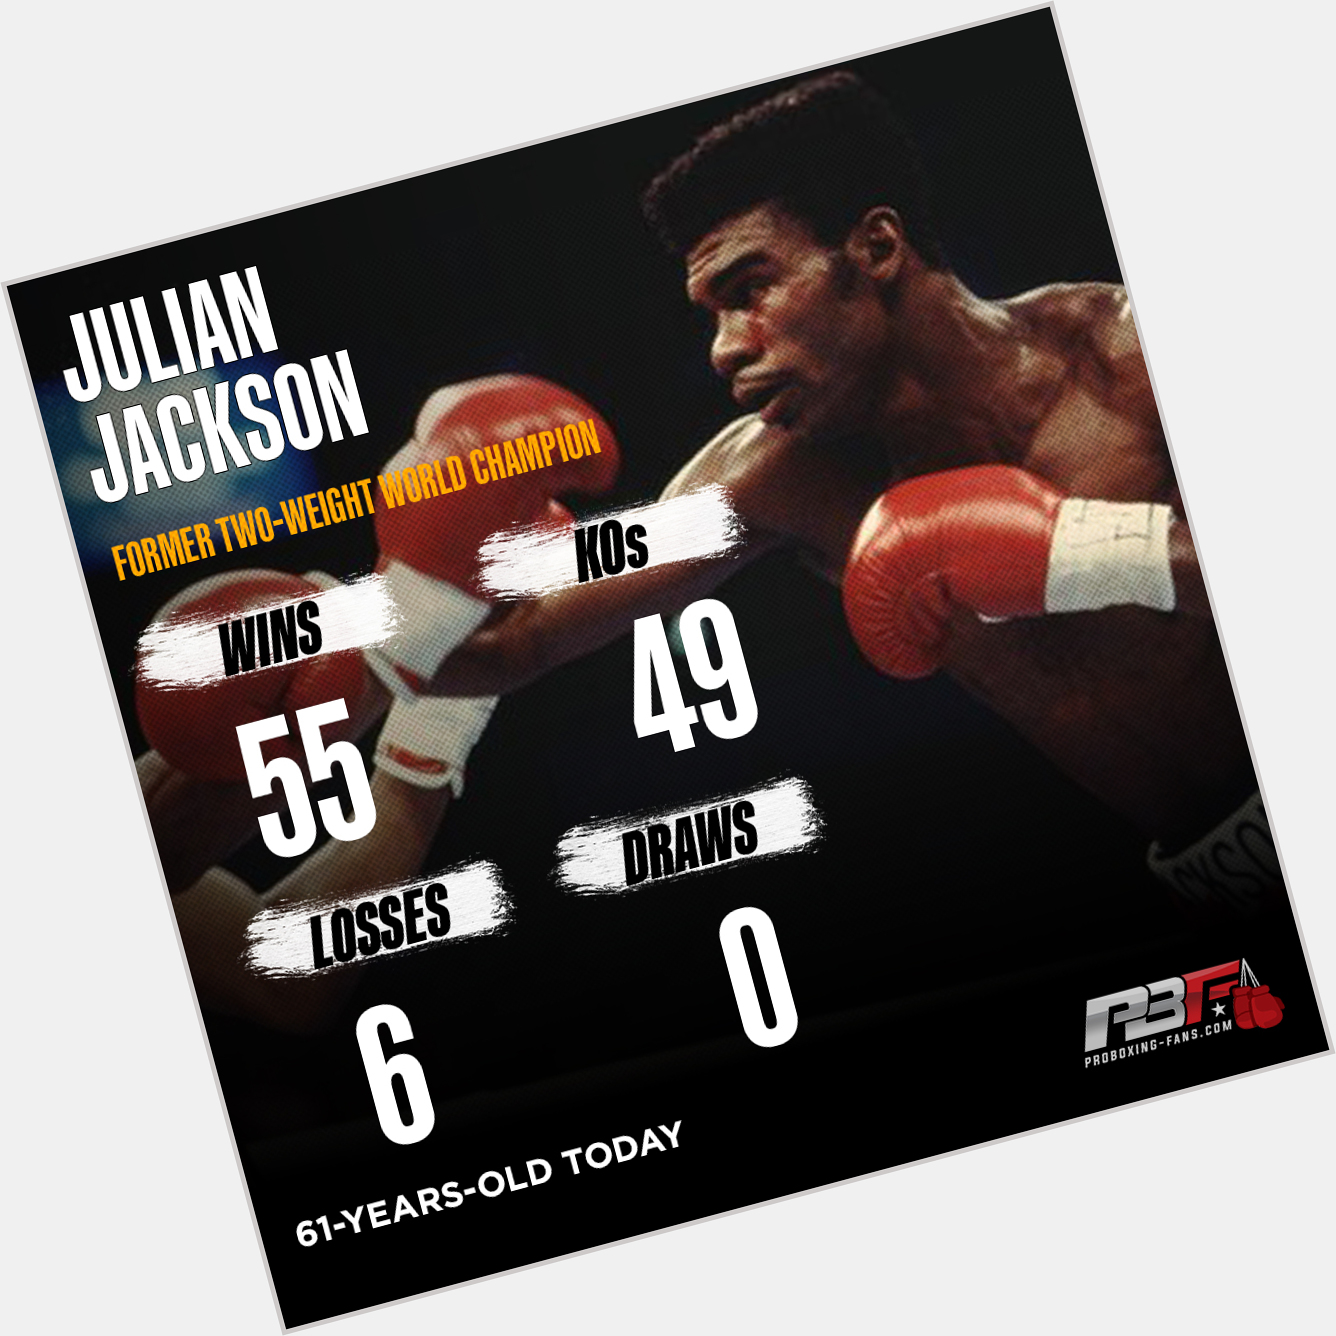  Happy Birthday Julian Jackson  One of the most fearsome knockout artists of all-time!  